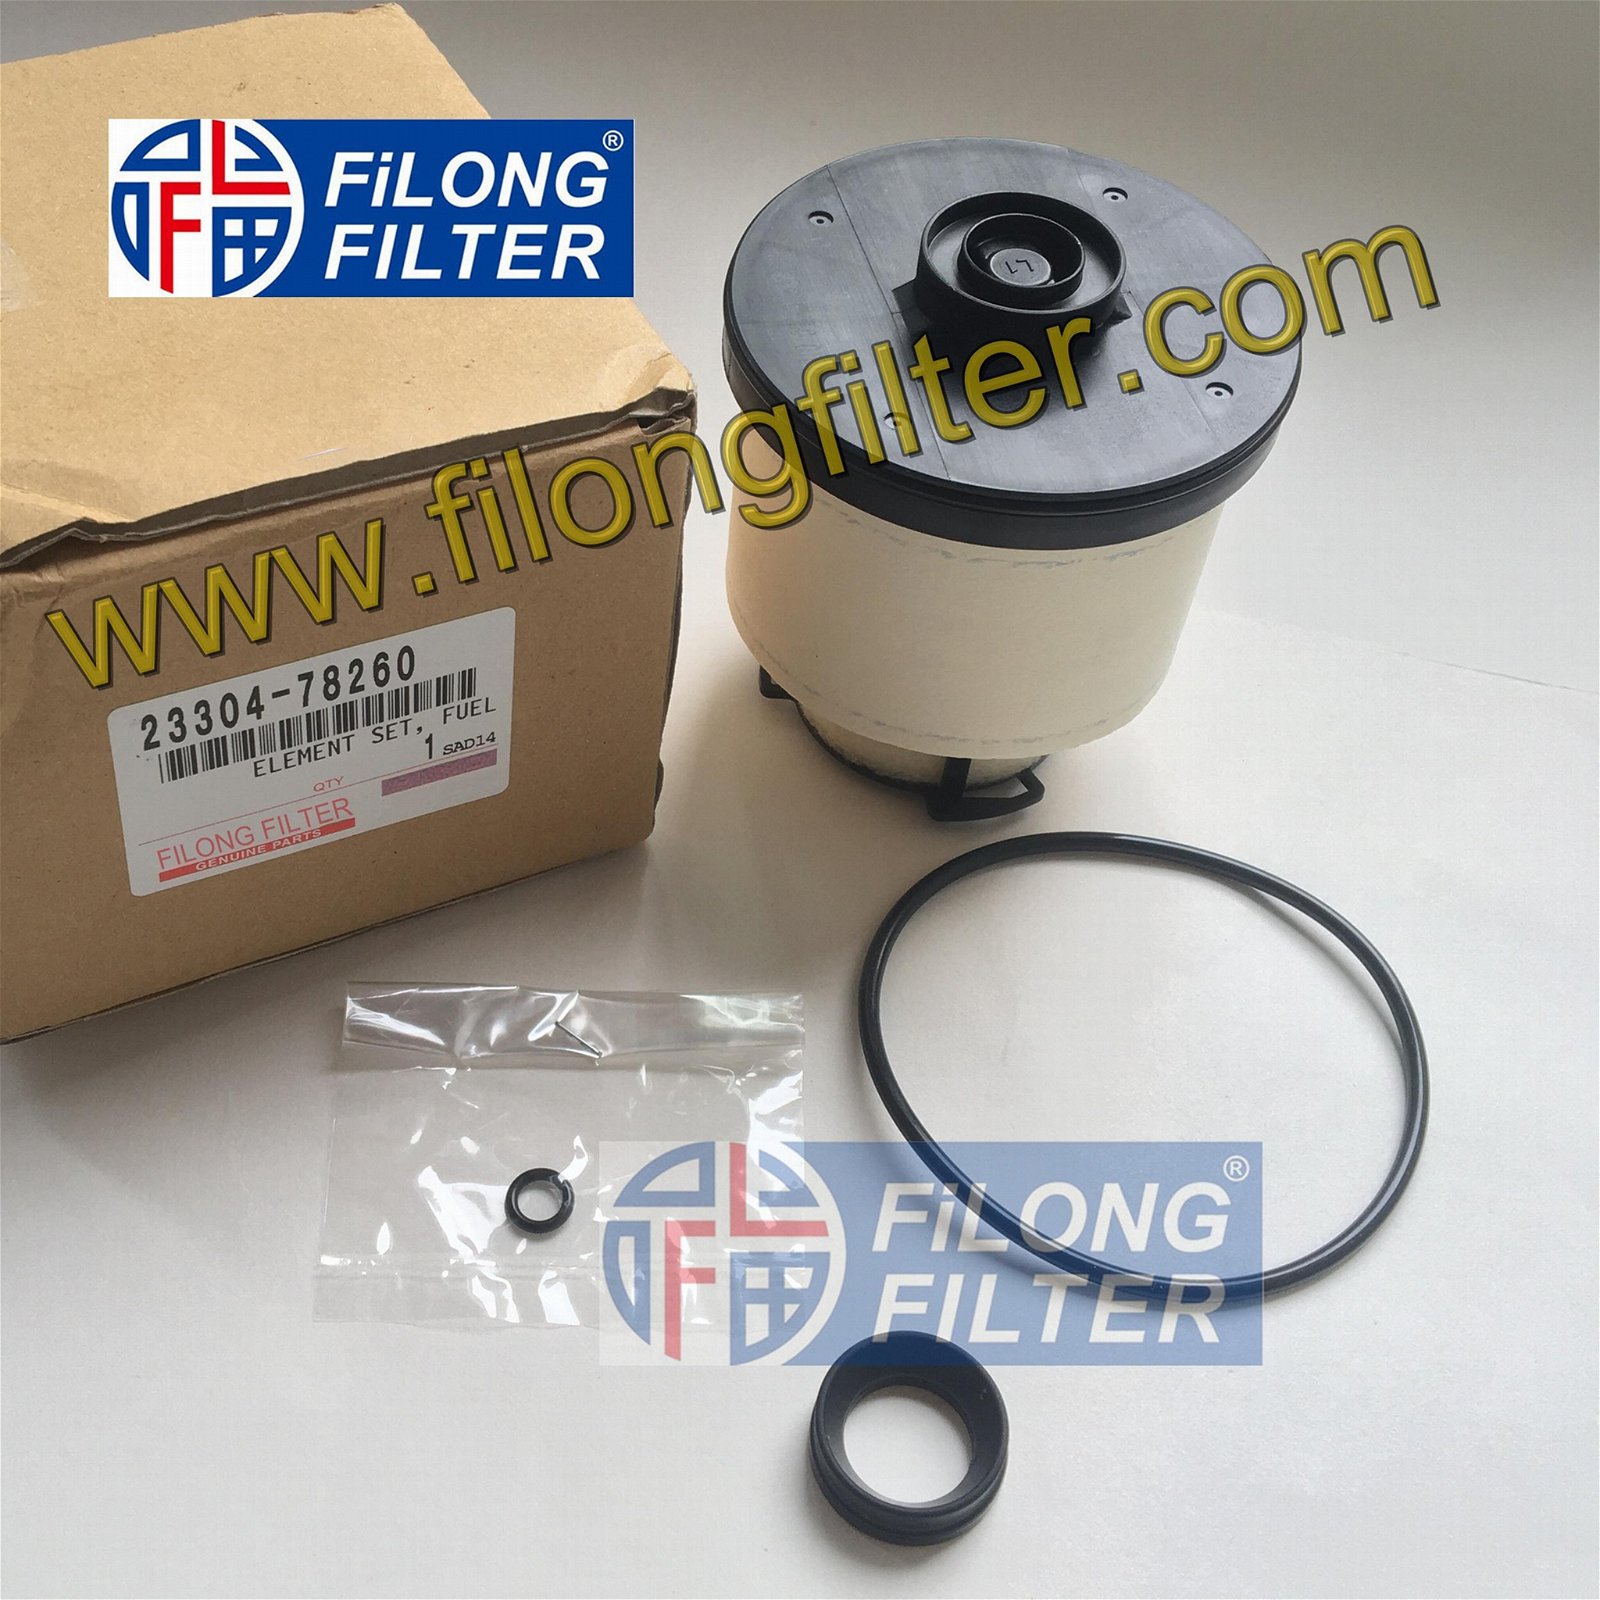 Fuel Filter: FFH-90095,23304-78260, 2330478260;  OEM Number:  HINO	23304-78260,2330478260 Reference Number:  FILONG	 FFH90095  Description and application:  FOR HINO DUTRO 2018 TKG-XZU655M;